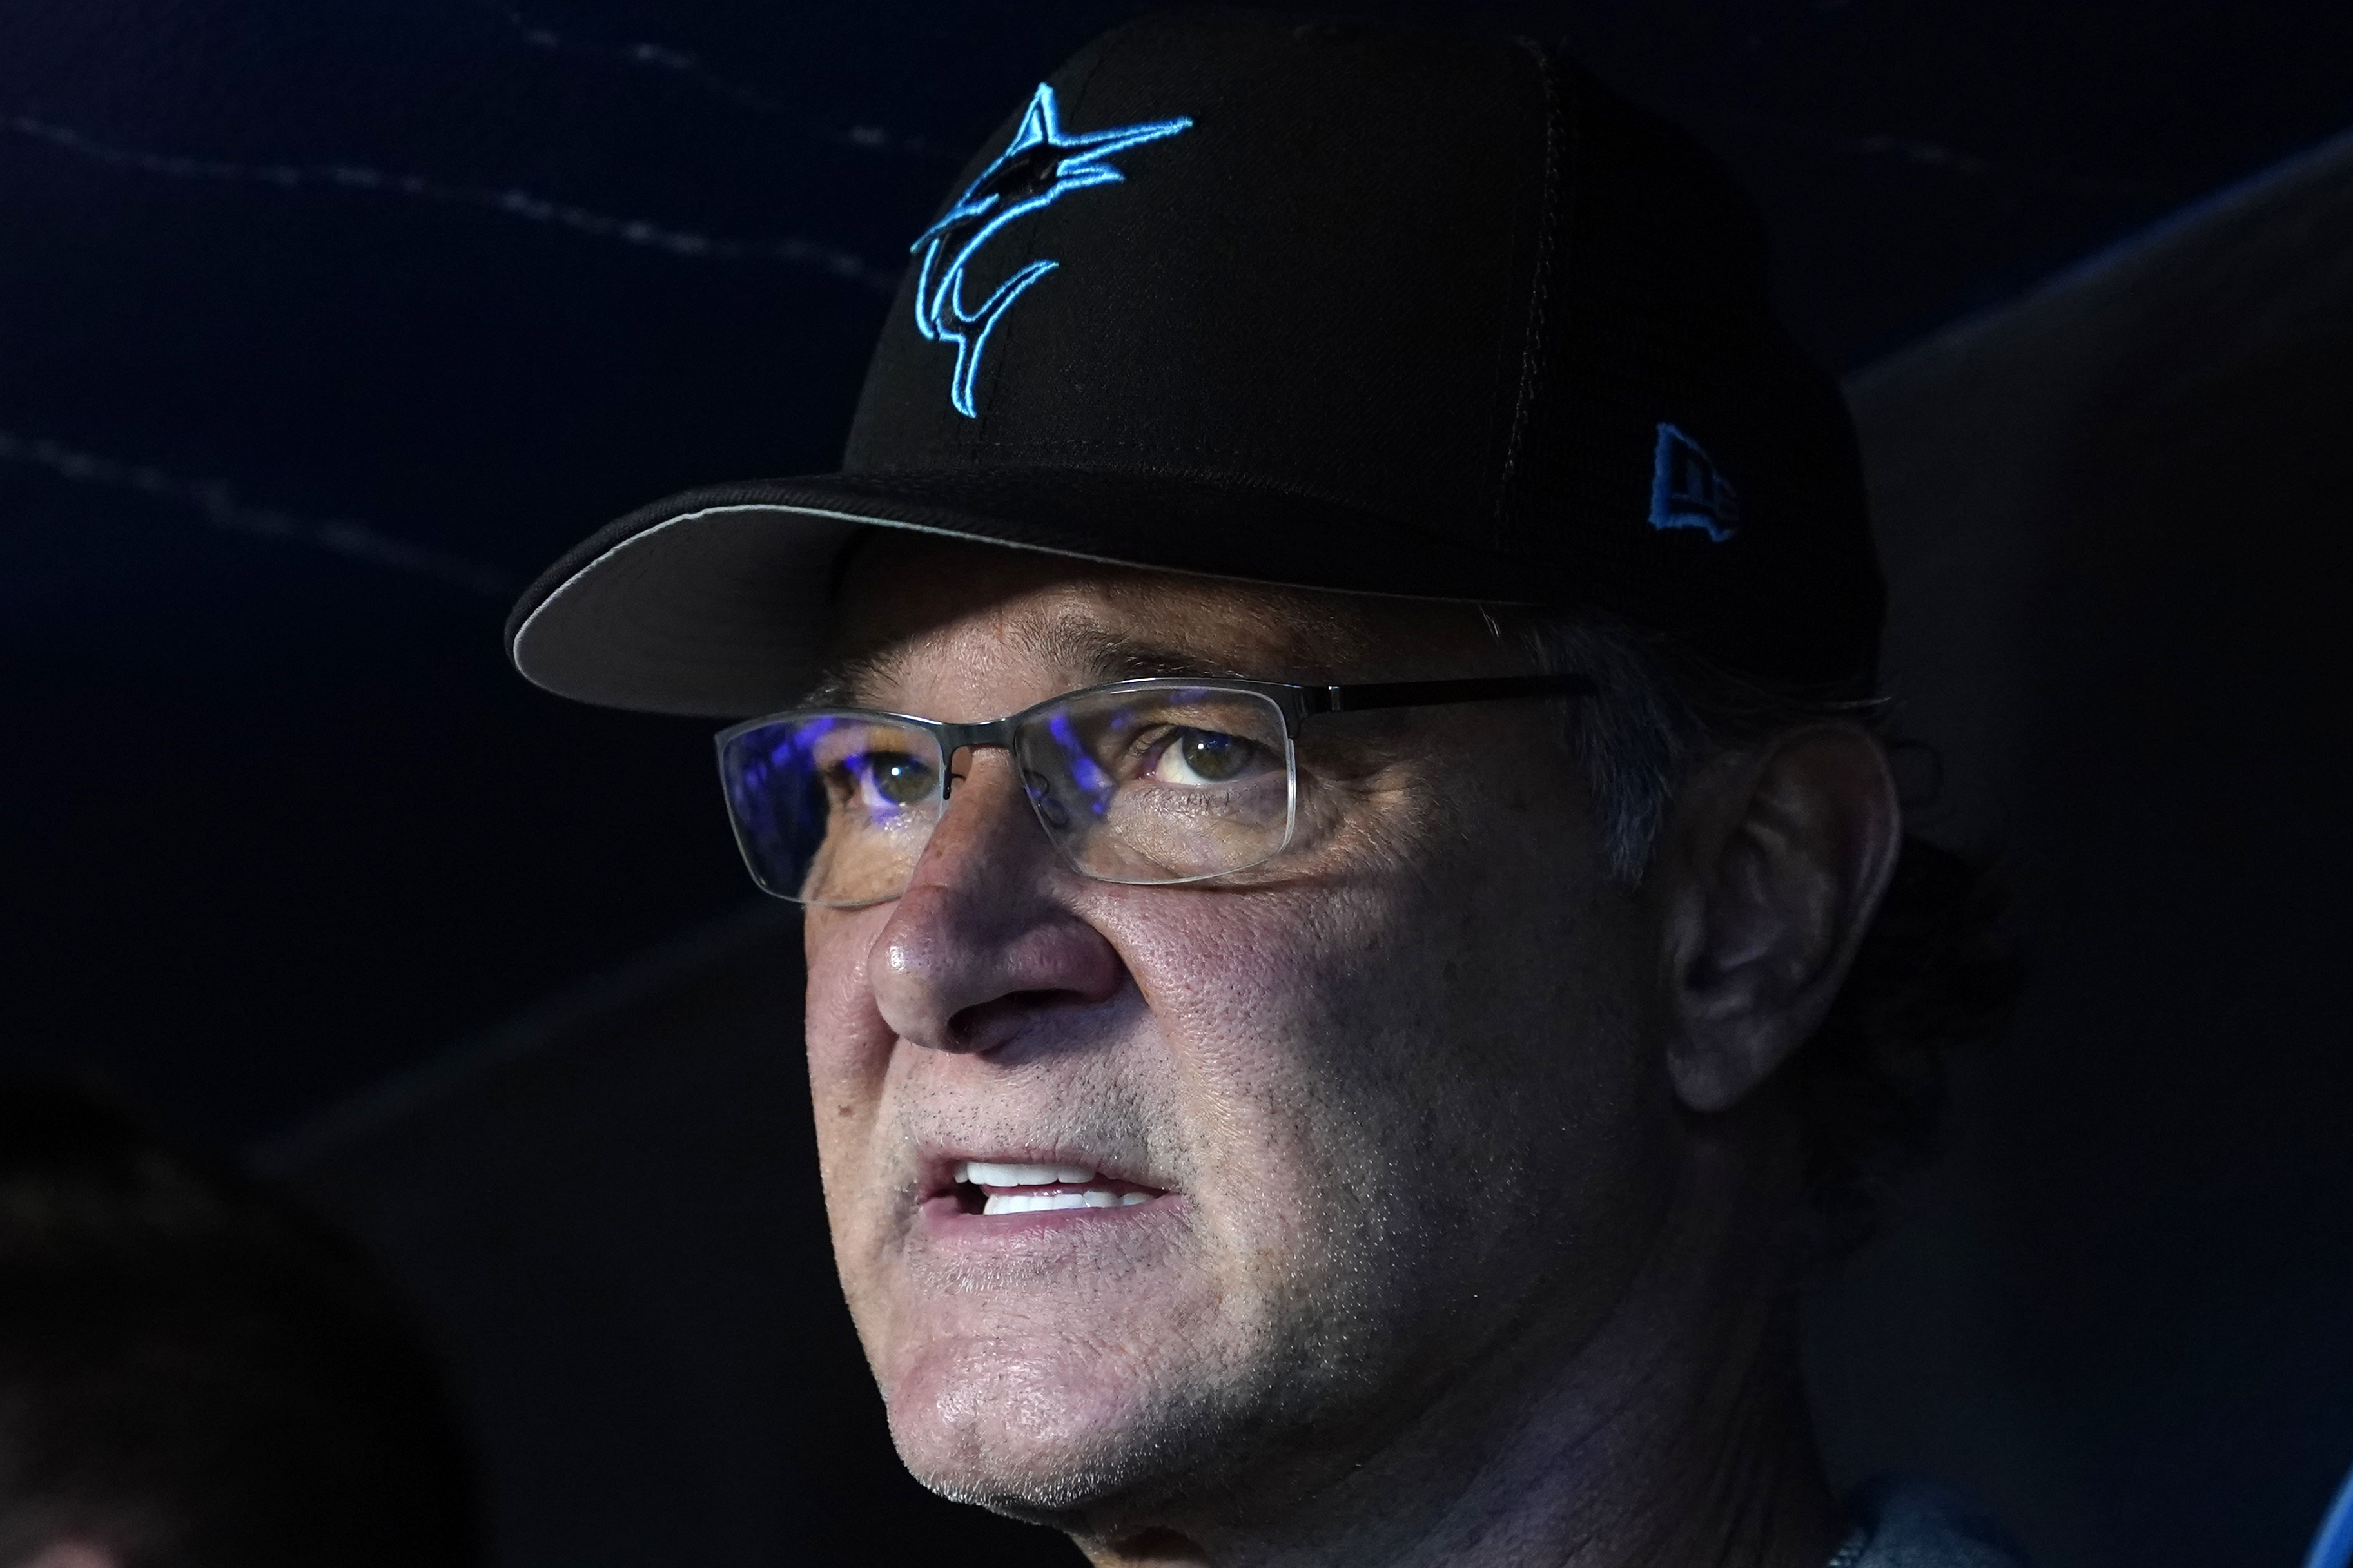 Will the Marlins replace Don Mattingly before the end of 2019?